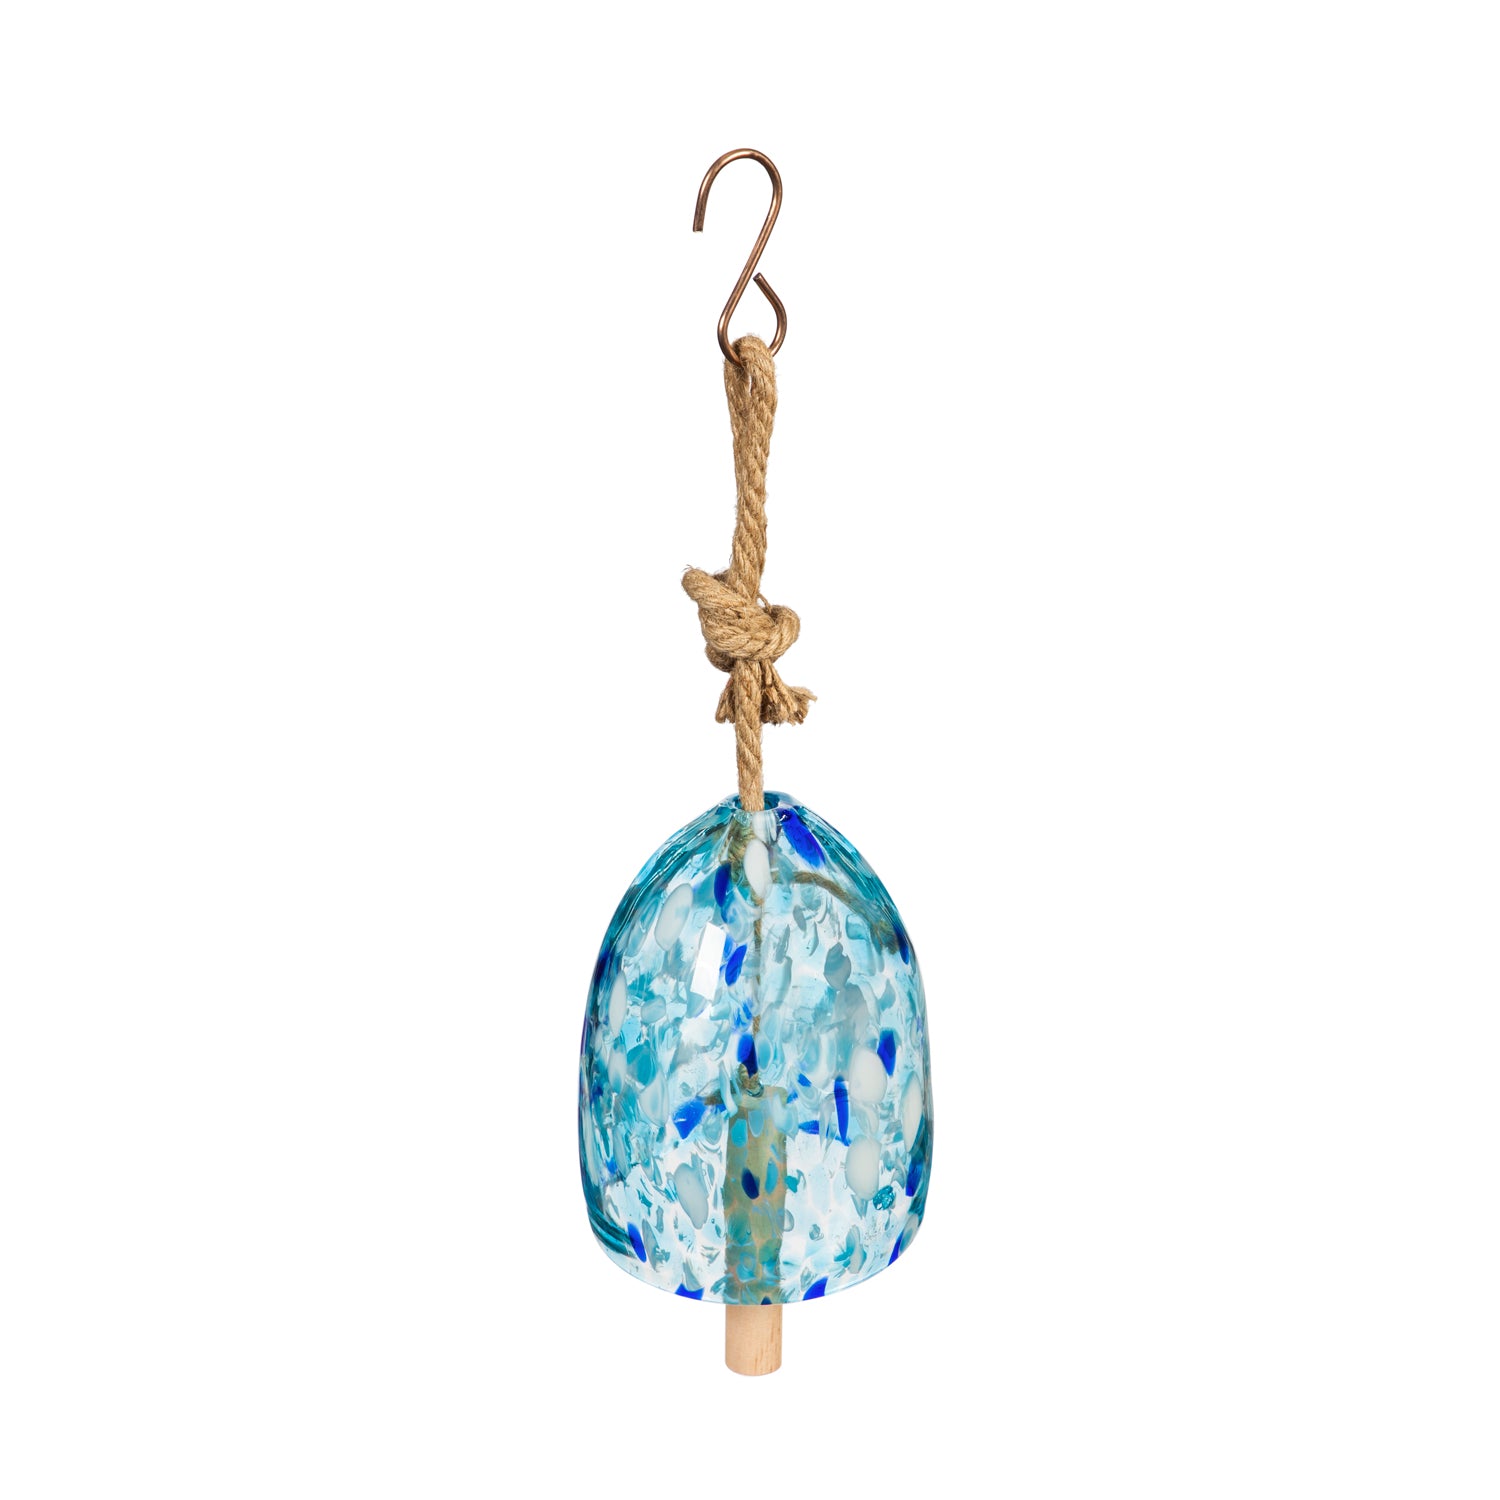 Glass Speckled Art Chime